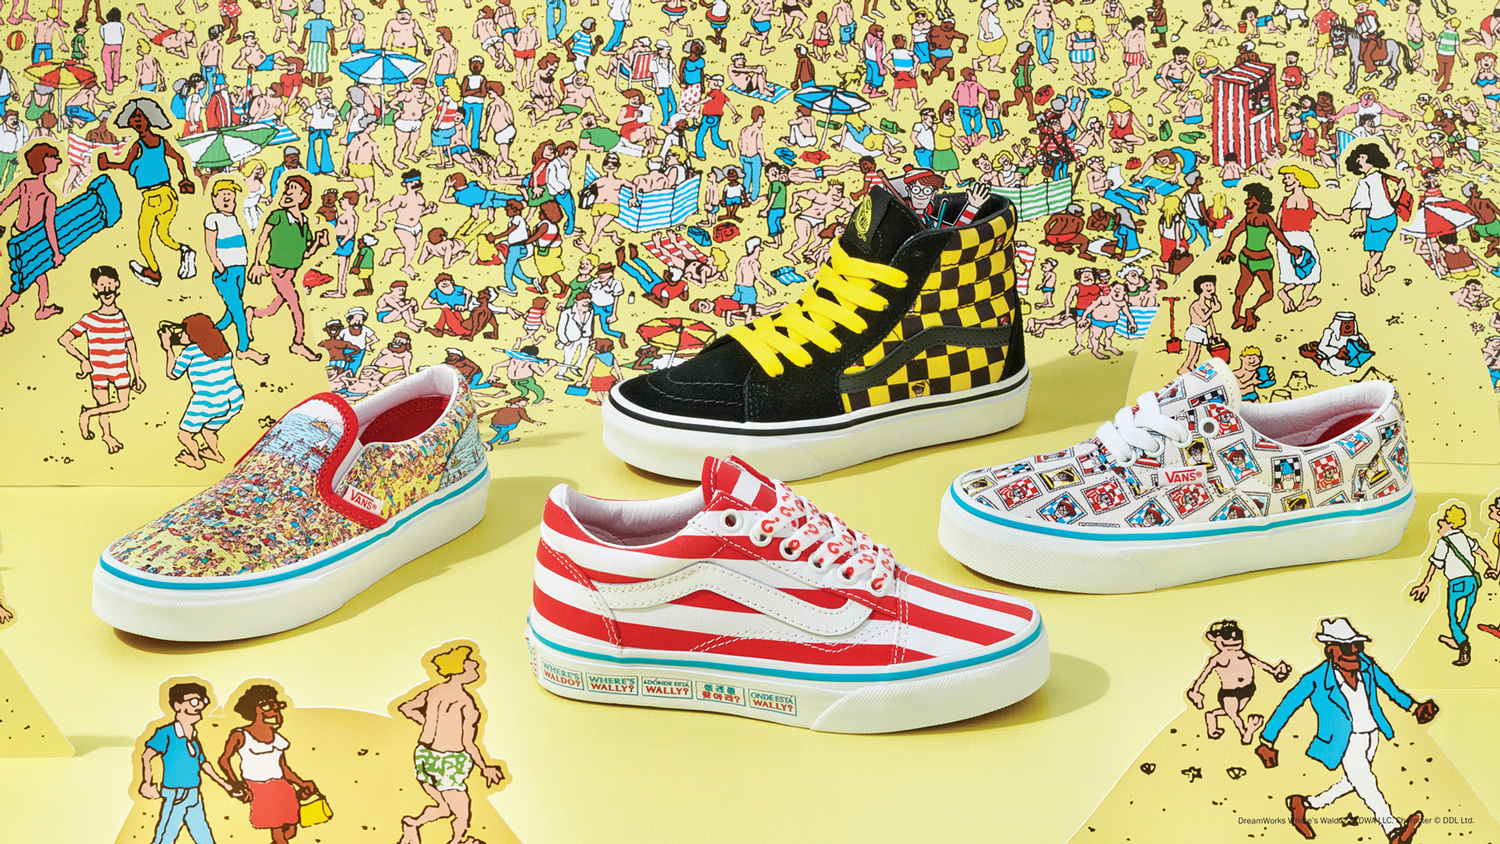 The Vans x Where’s Waldo Collab Just Dropped & It’s Beyond Cool